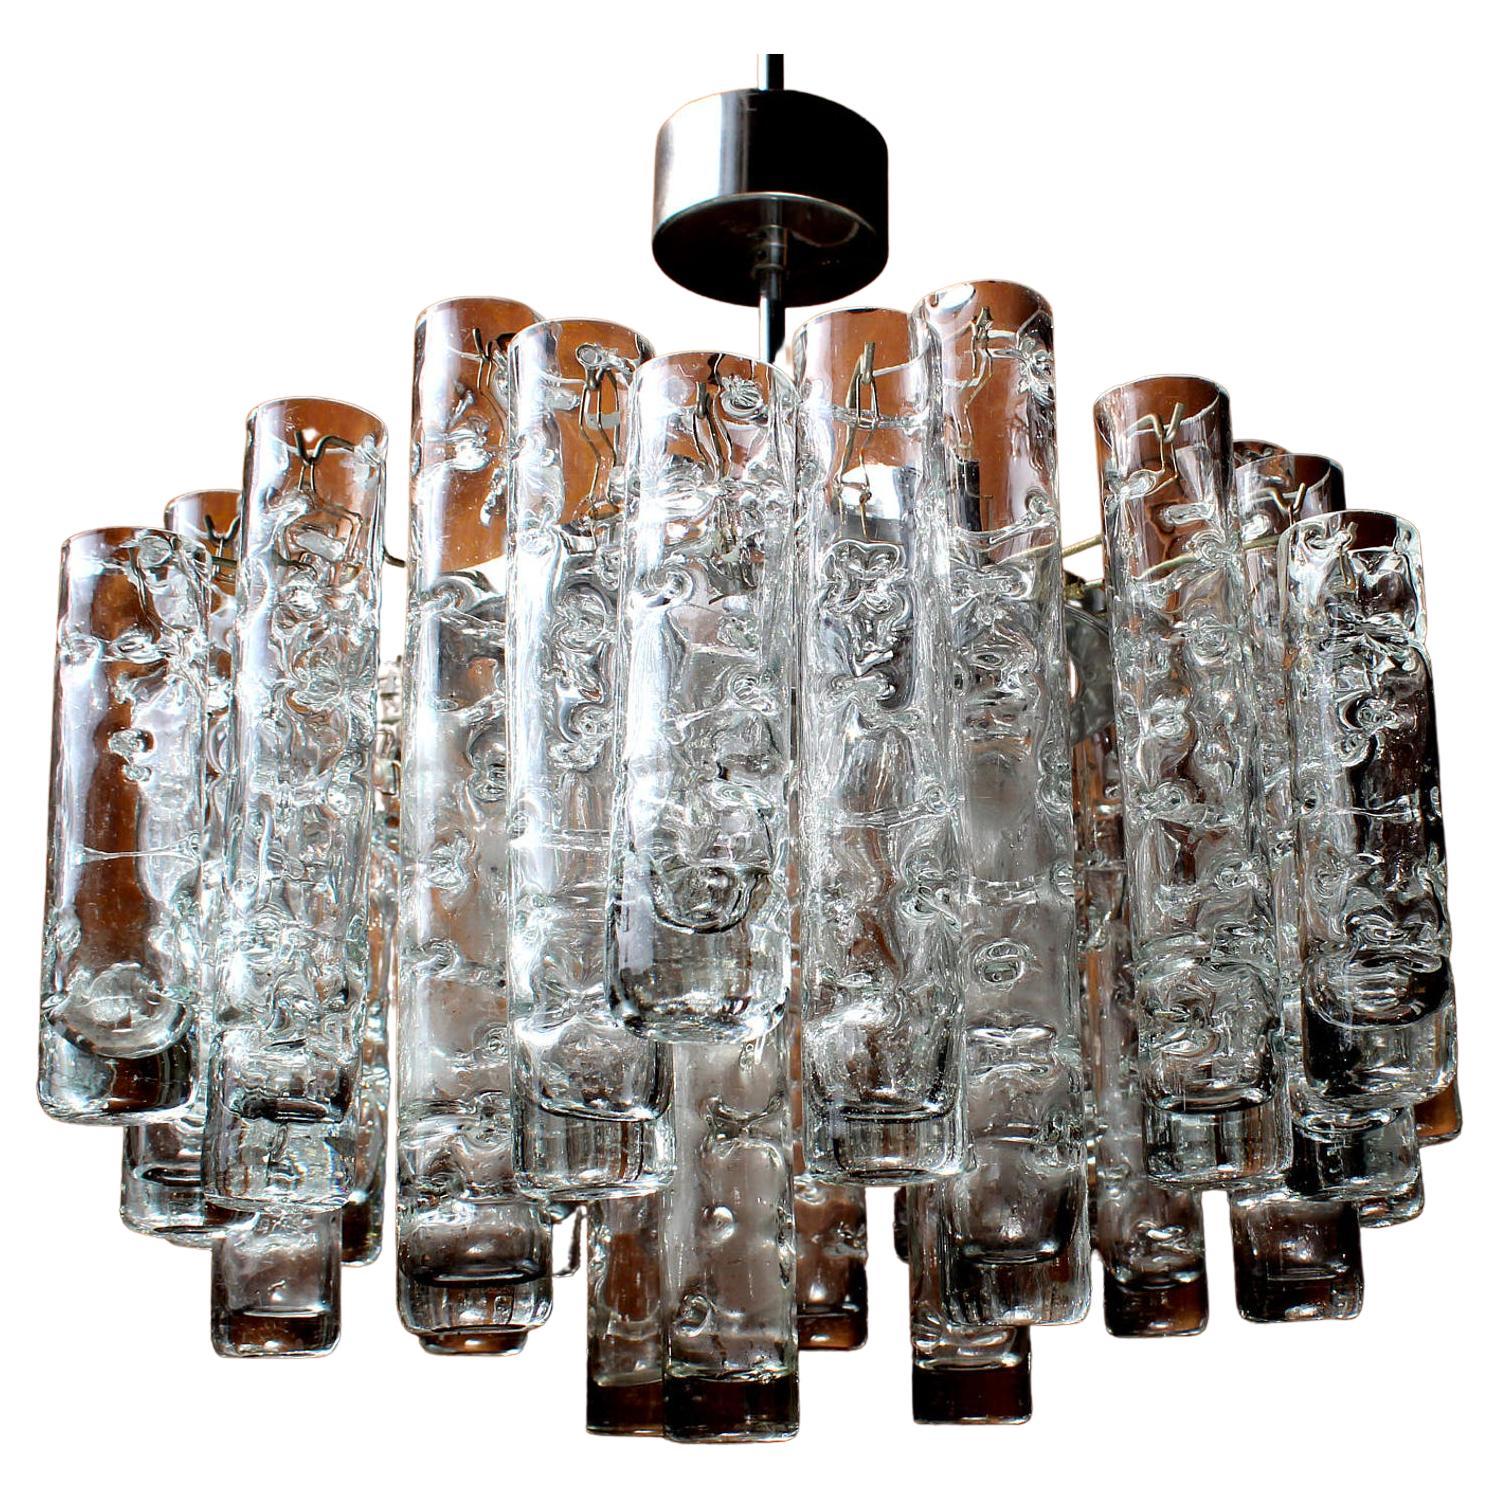 Heavy doria fürth crystal glass chandelier.

3 Lights & 31 grand hand-made glass tubes.

Measures: diameter 18 inches original height 33 inches

1 of 2 Elegant 3 lights (e27) fine crystal chandelier 1970´s / Doria / Fürth / Germany.

This